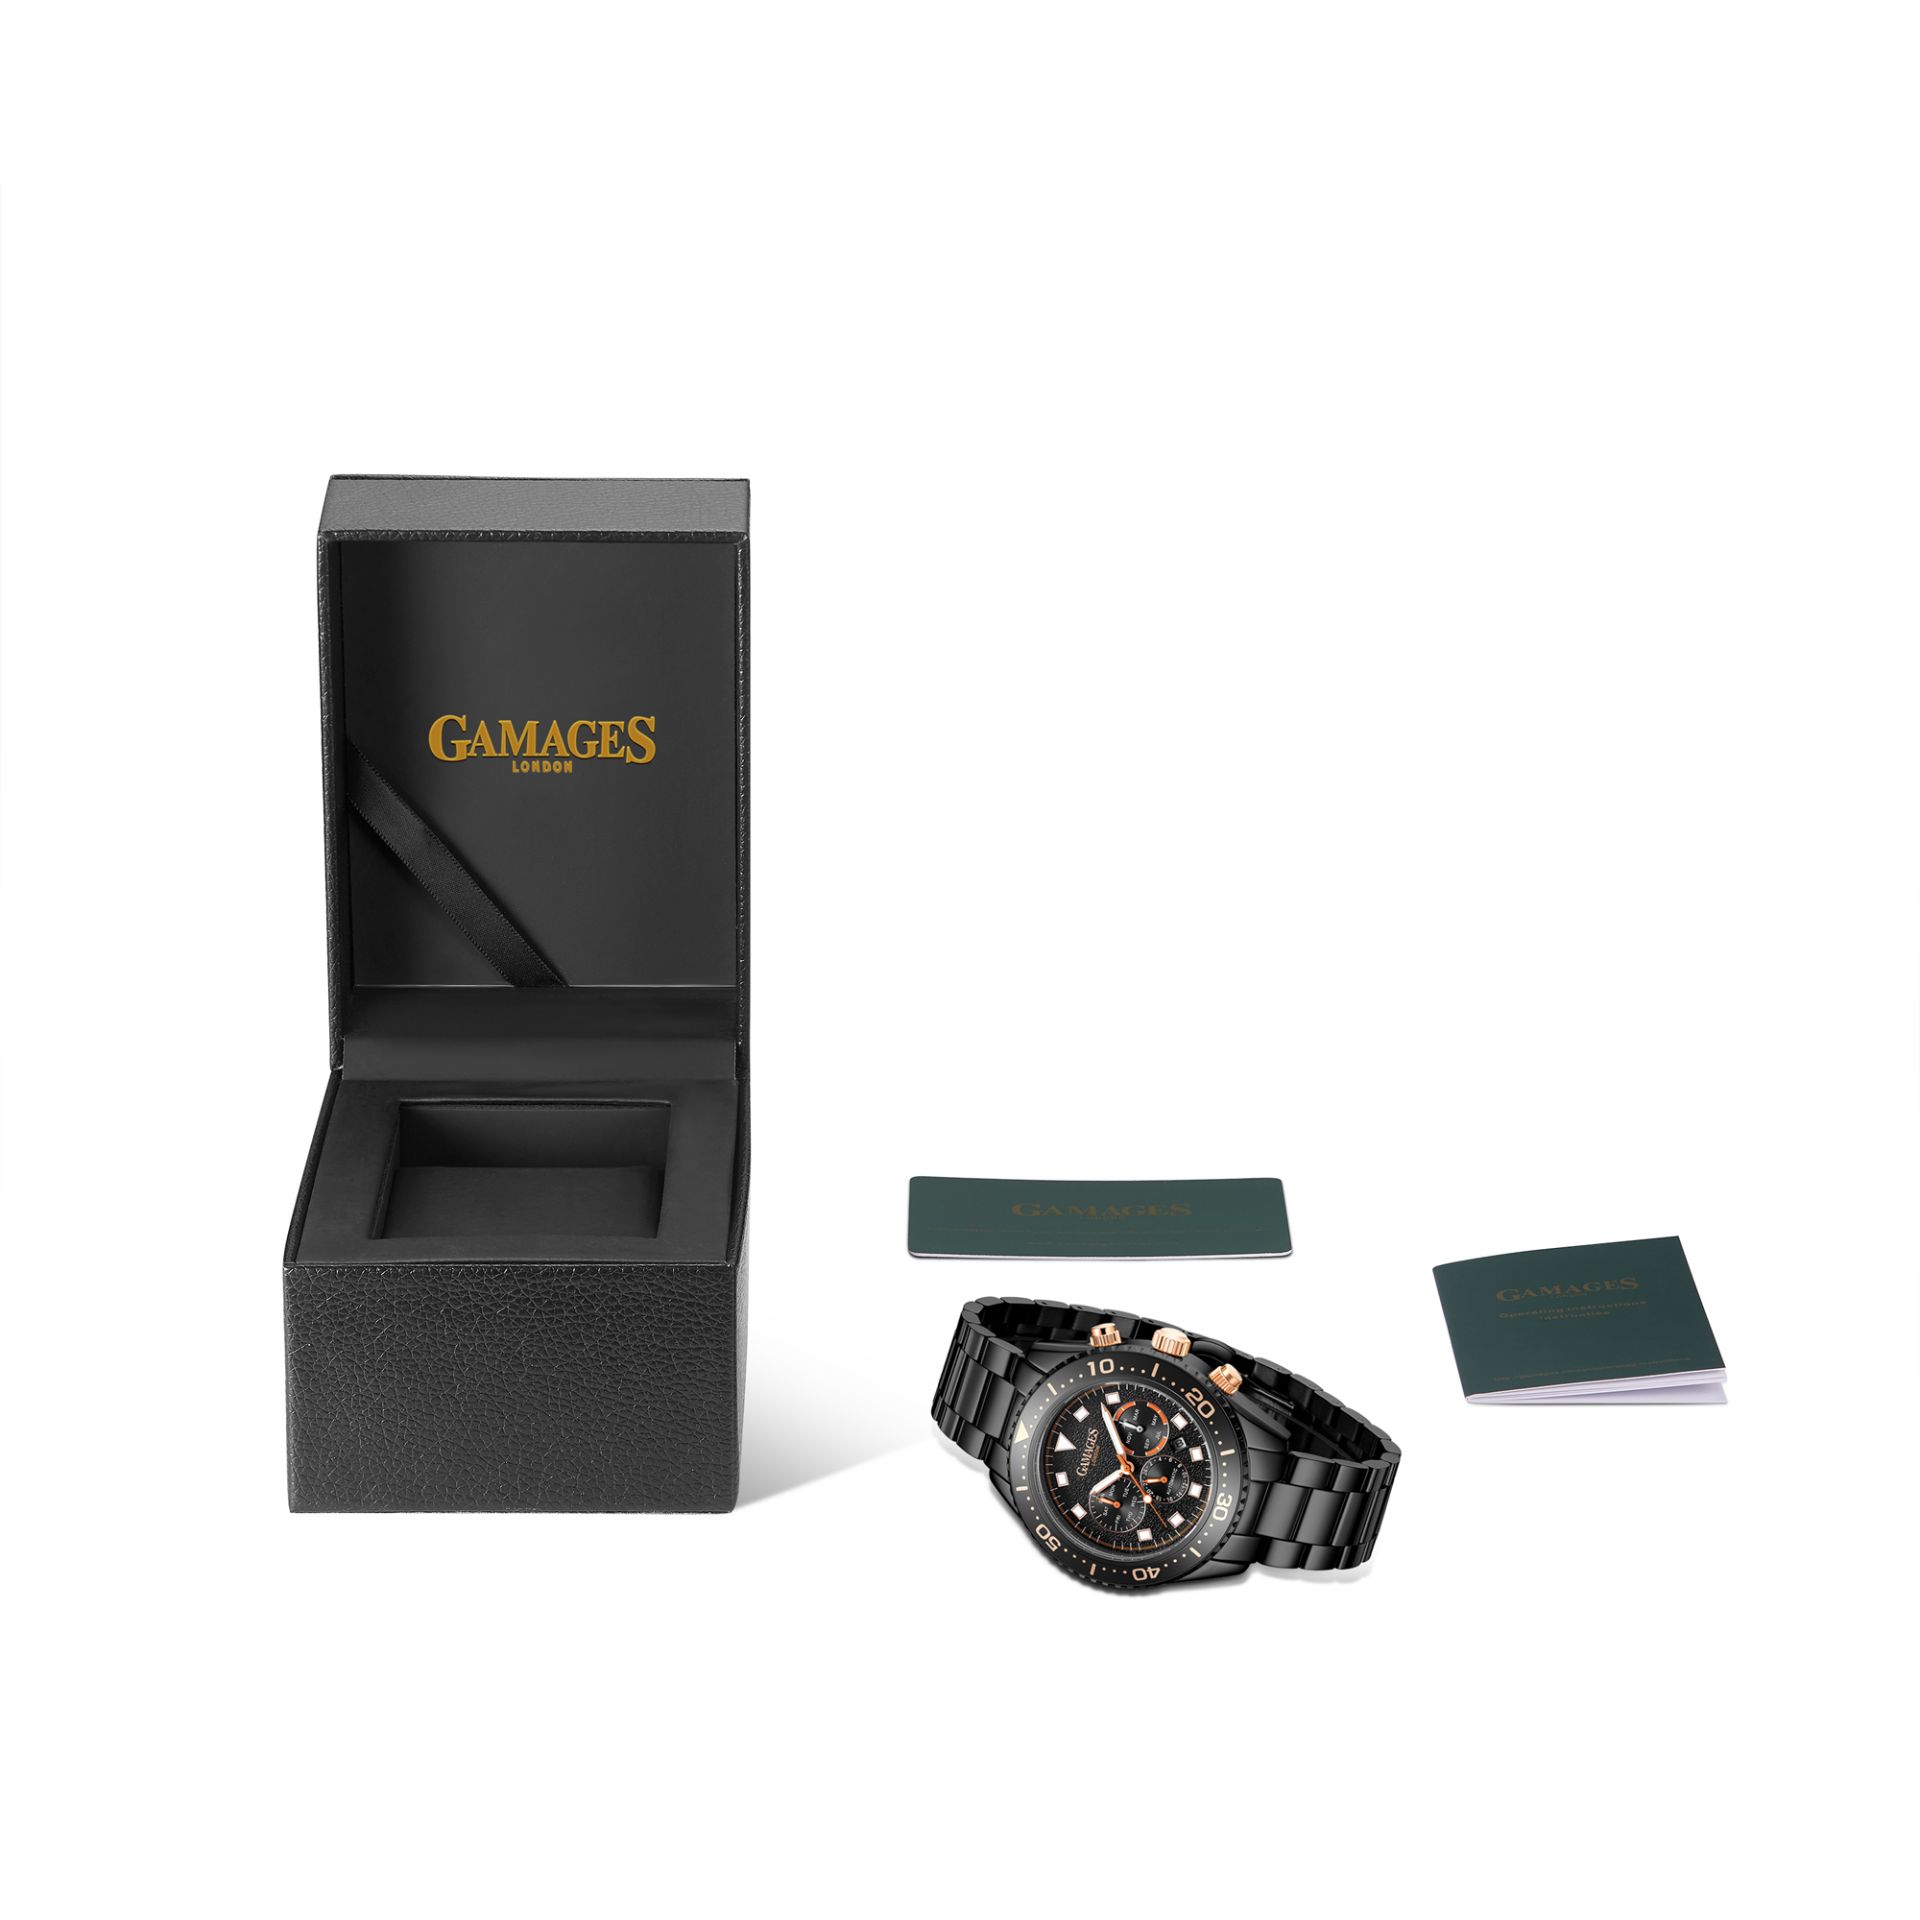 Limited Edition Hand Assembled Gamages Allure Automatic Black - 5 Year Warranty & Free Delivery